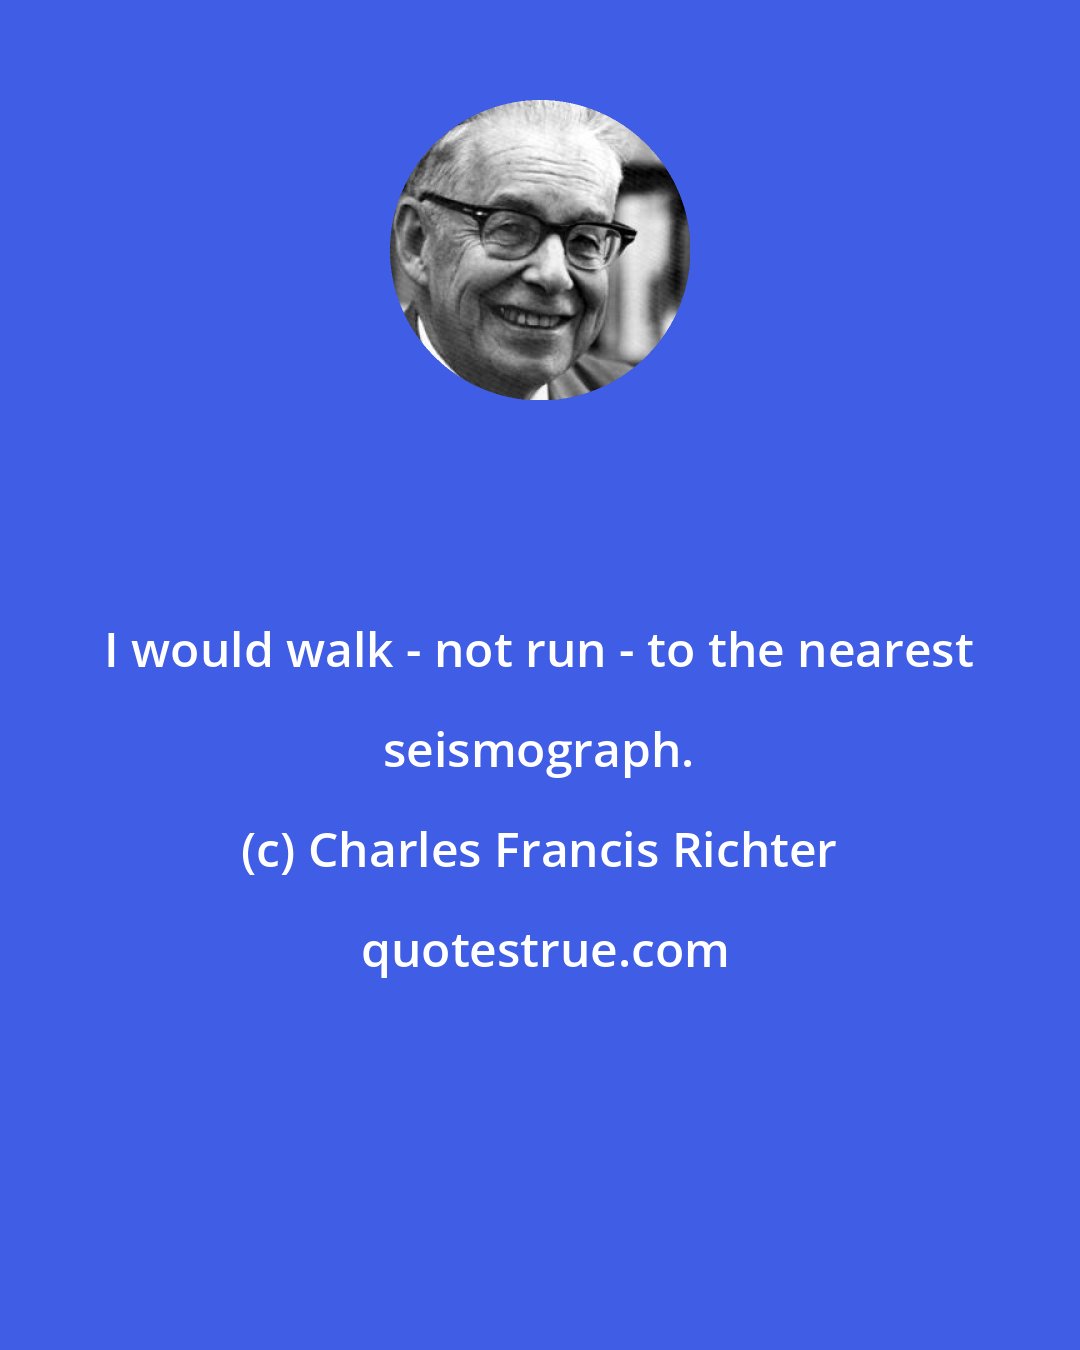 Charles Francis Richter: I would walk - not run - to the nearest seismograph.